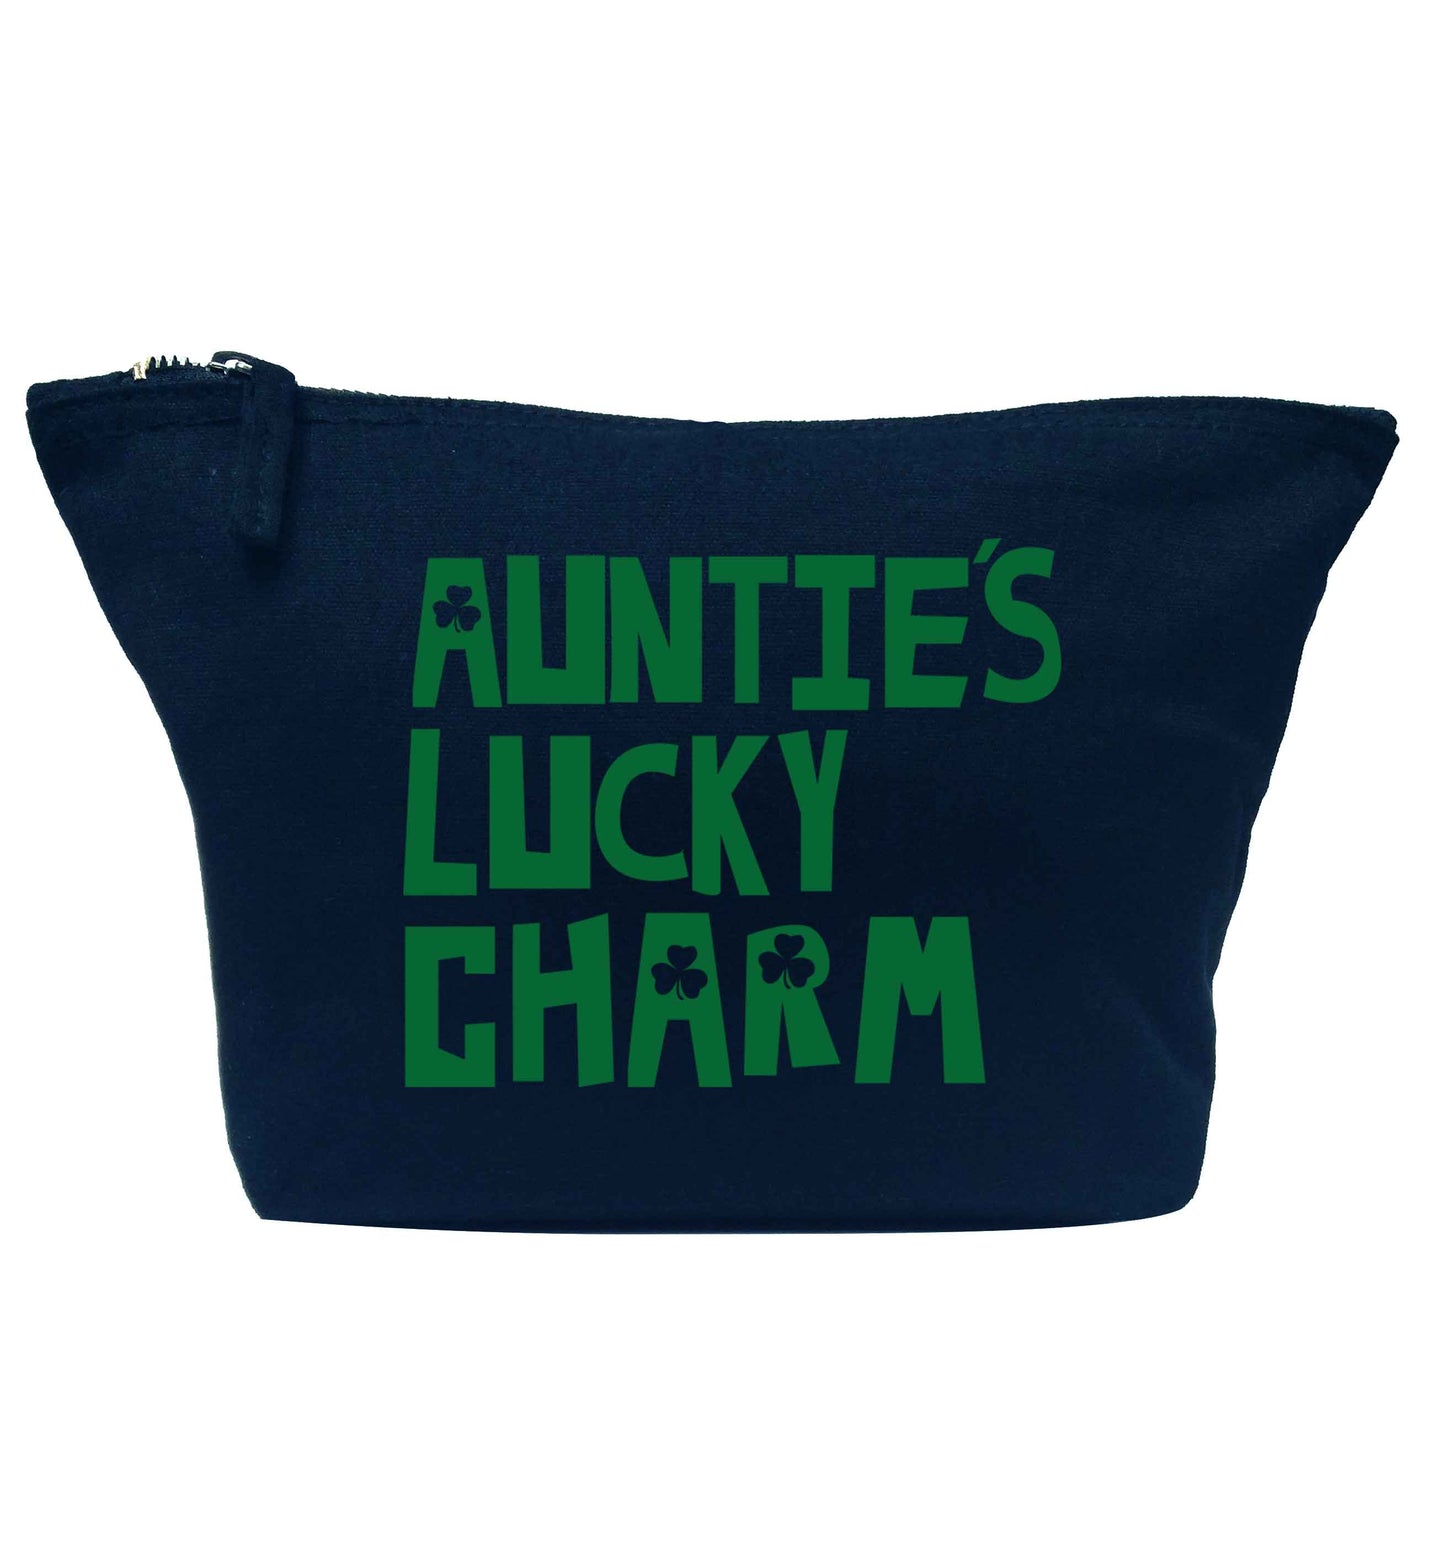 Auntie's lucky charm navy makeup bag